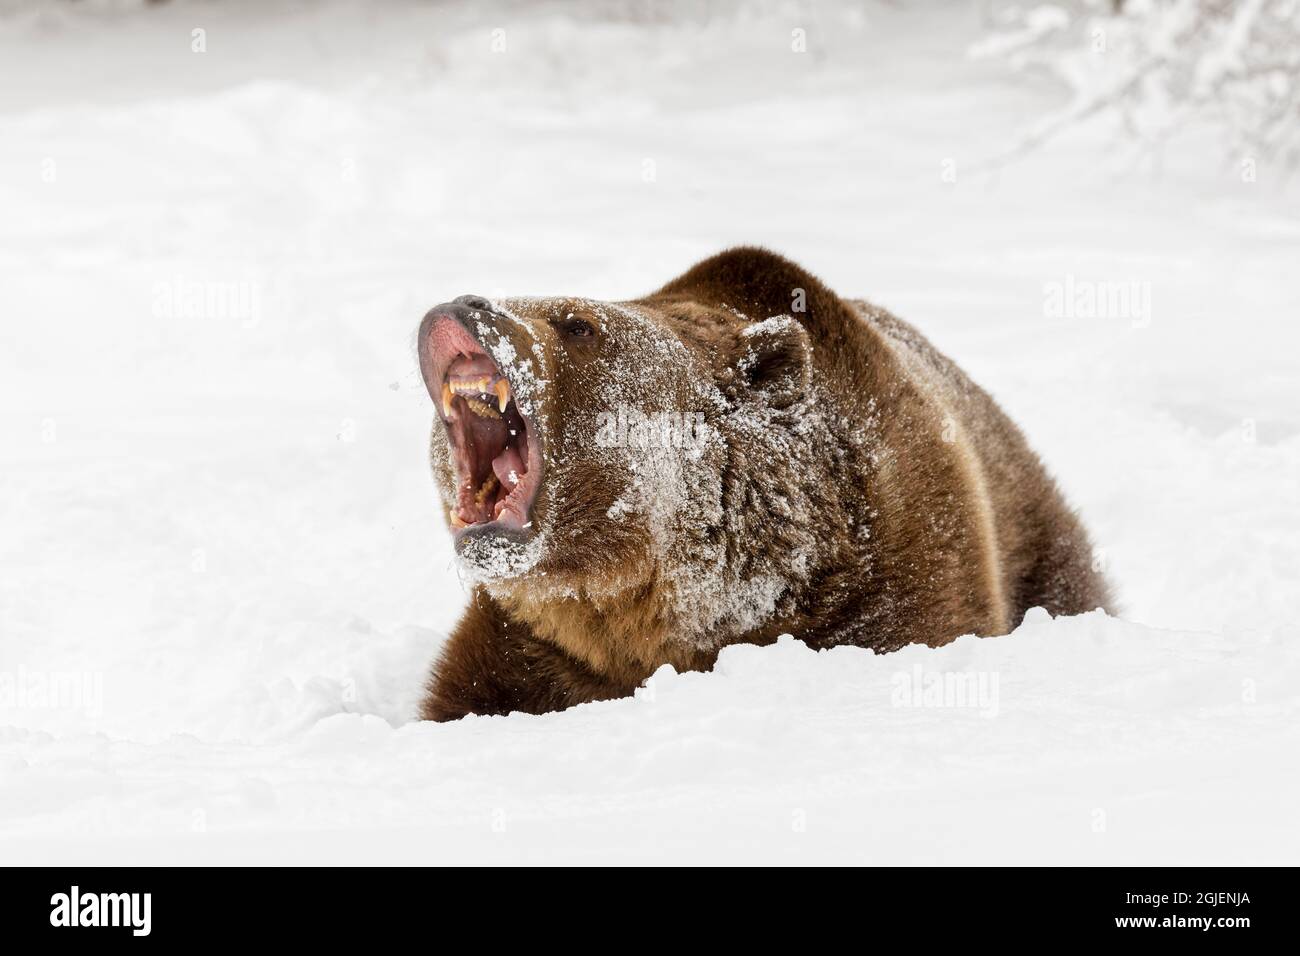 Grizzly bear snarling in winter. Stock Photo